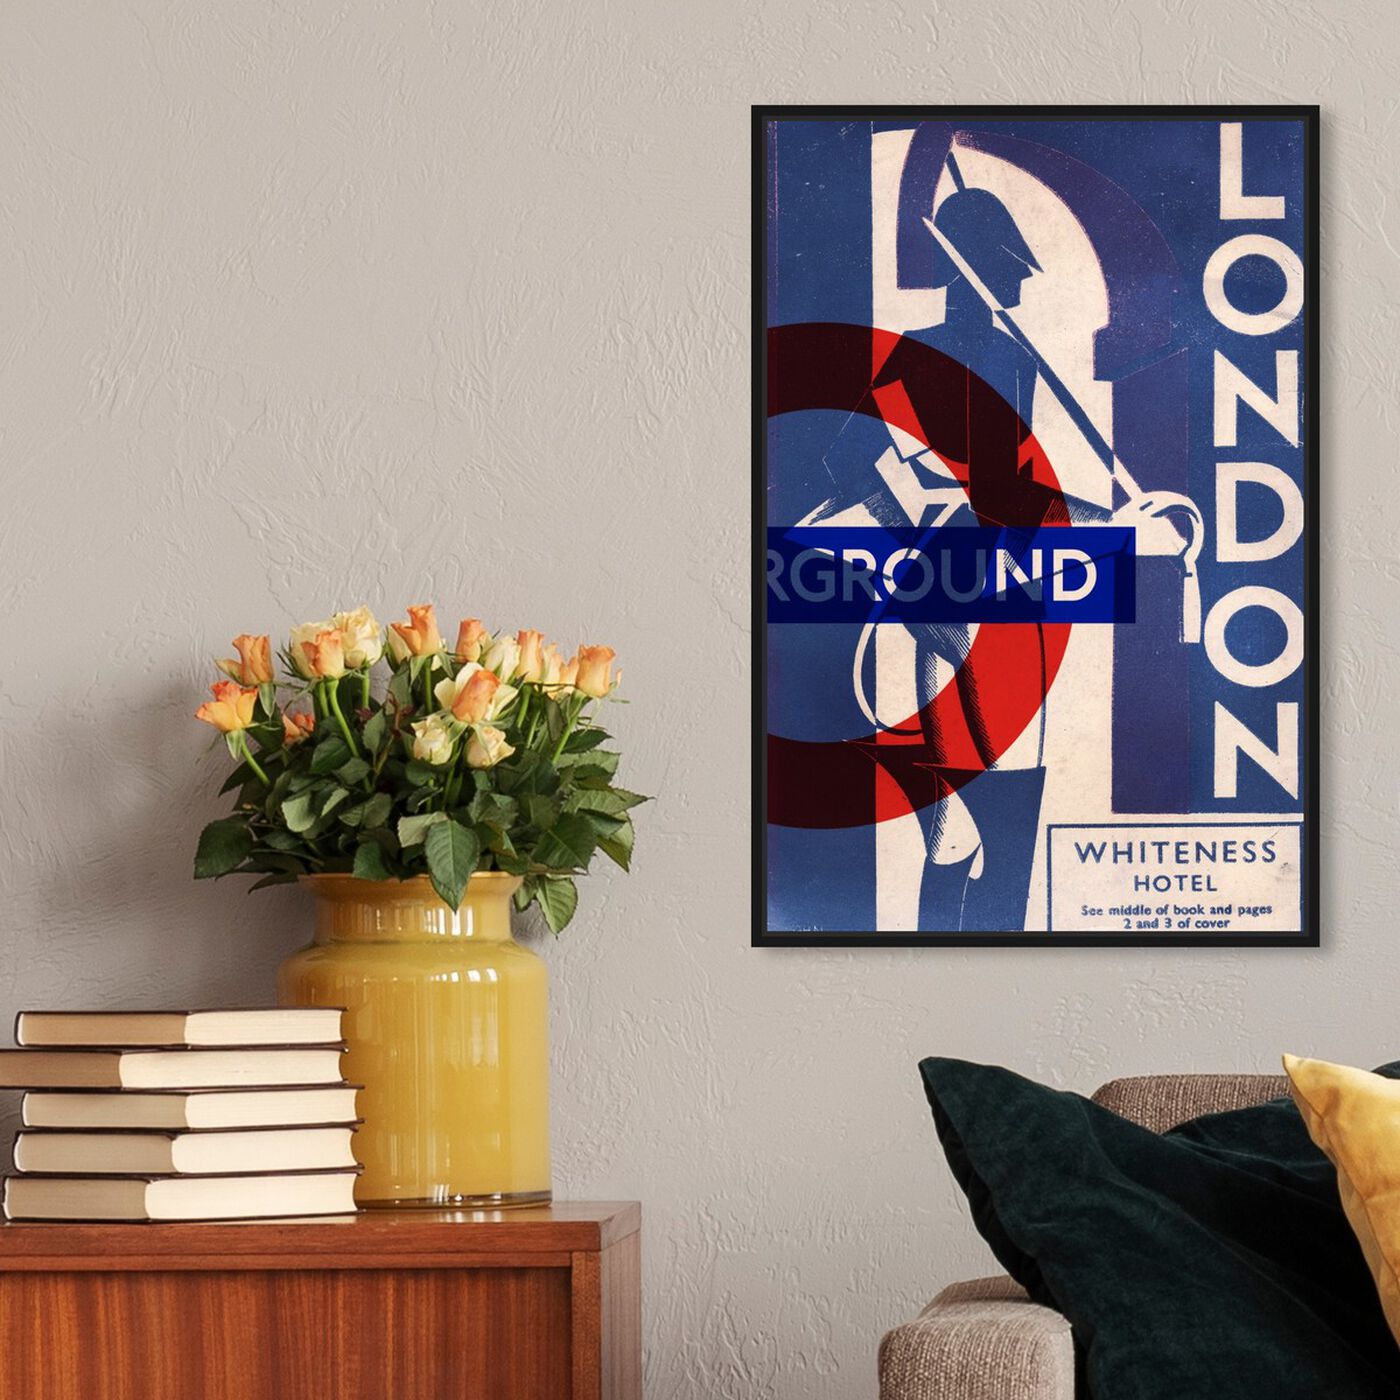 Hanging view of London Blues featuring advertising and posters art.